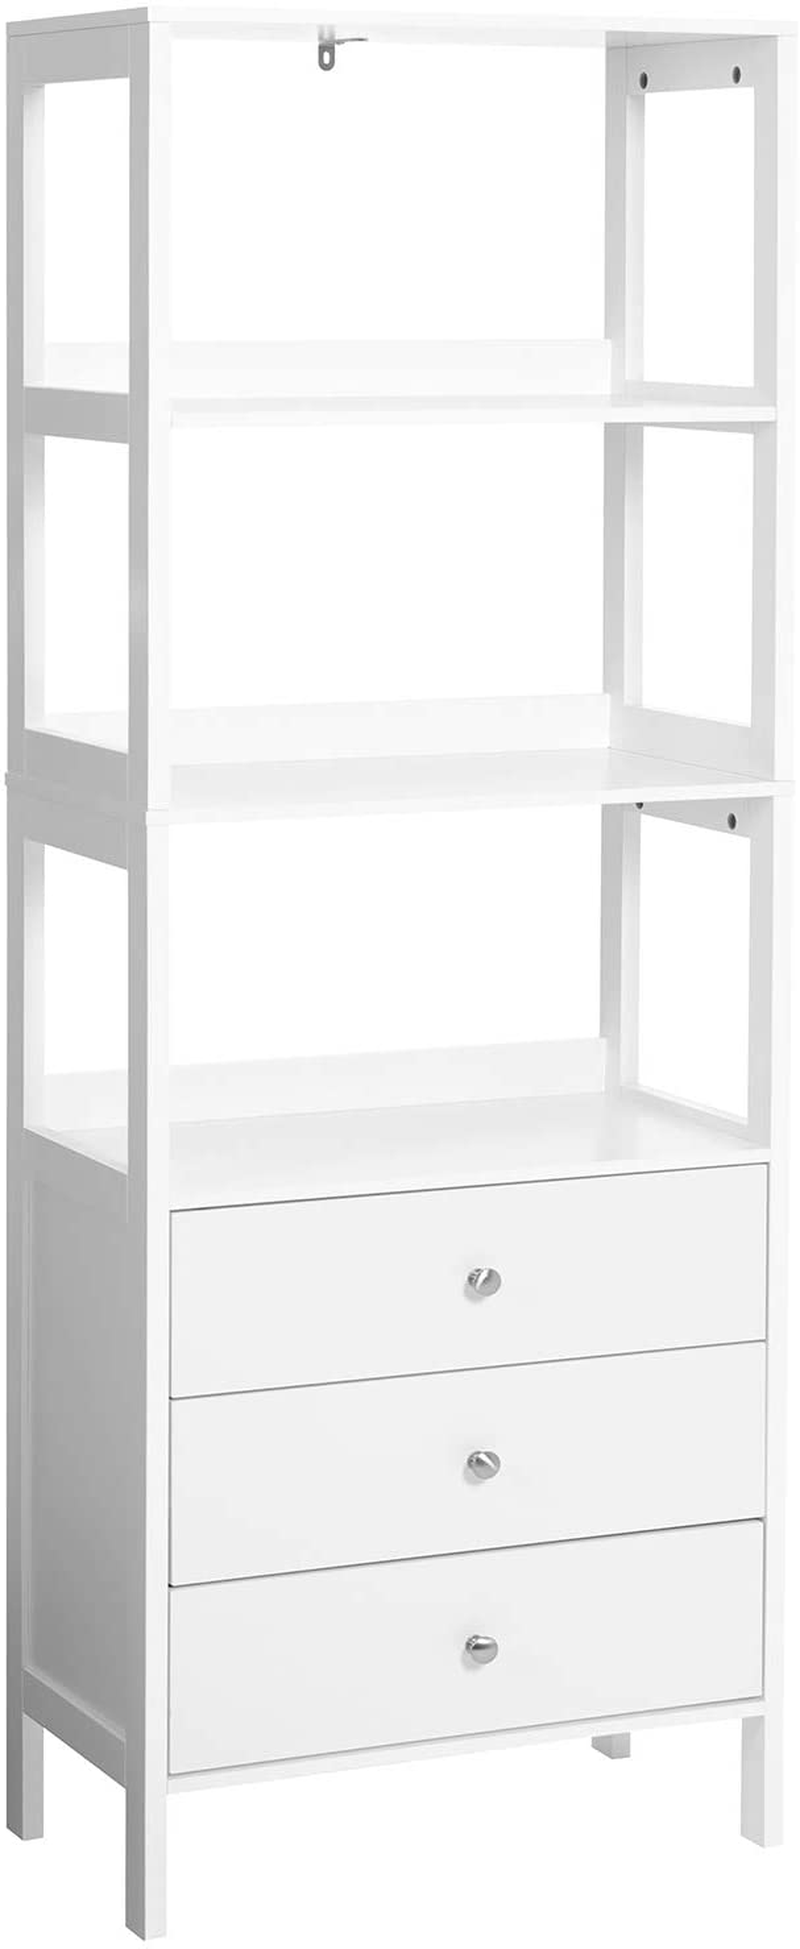 Rena Floor Cabinet, Bathroom Tall Cabinet with 3 Drawers